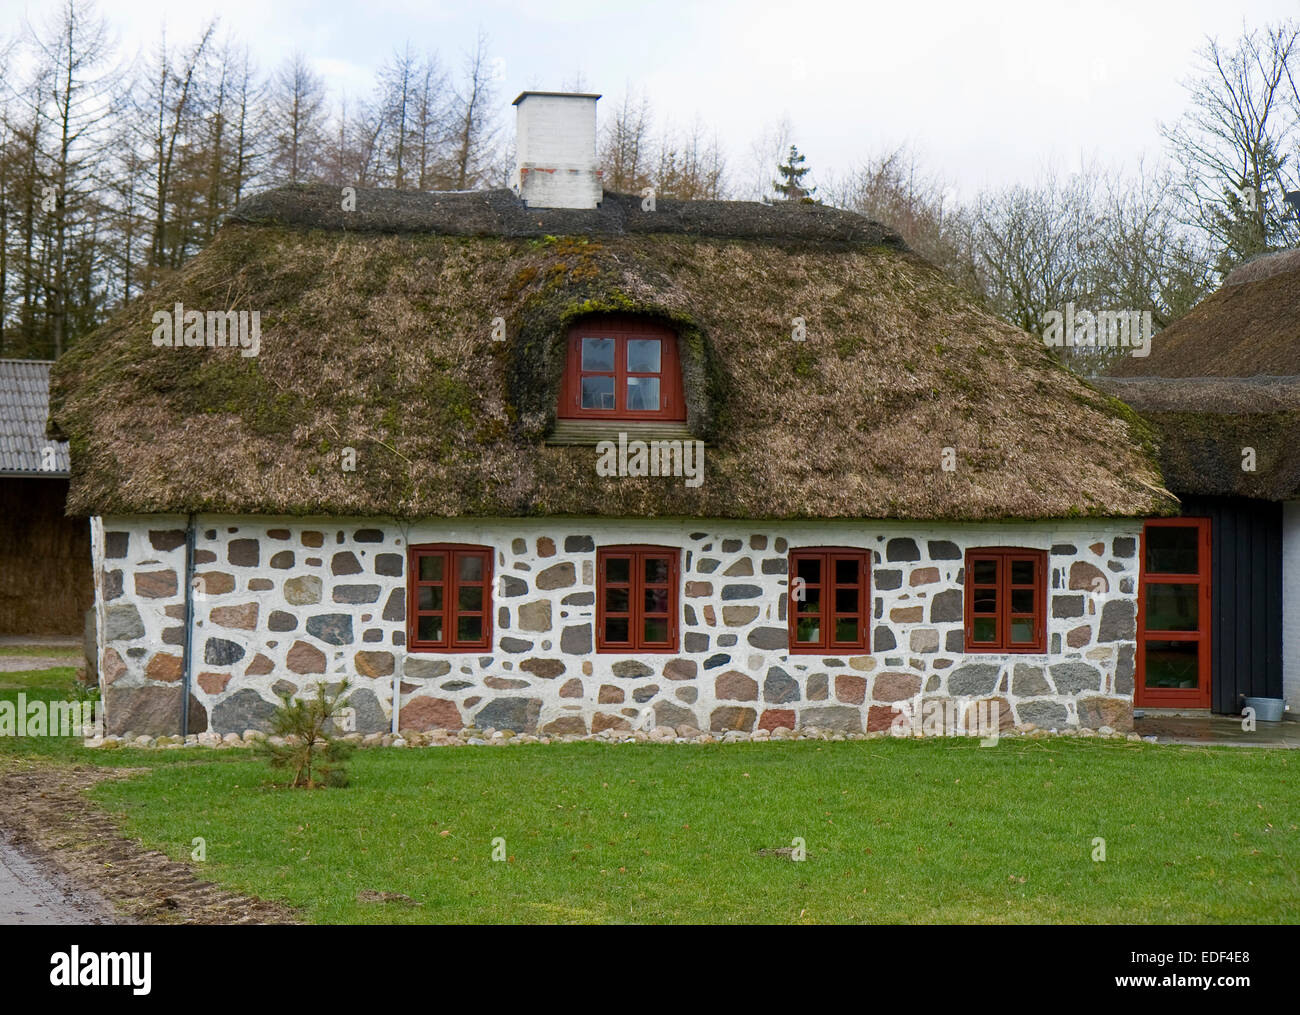 Small stone house with thatched roof and red windows Stock Photo